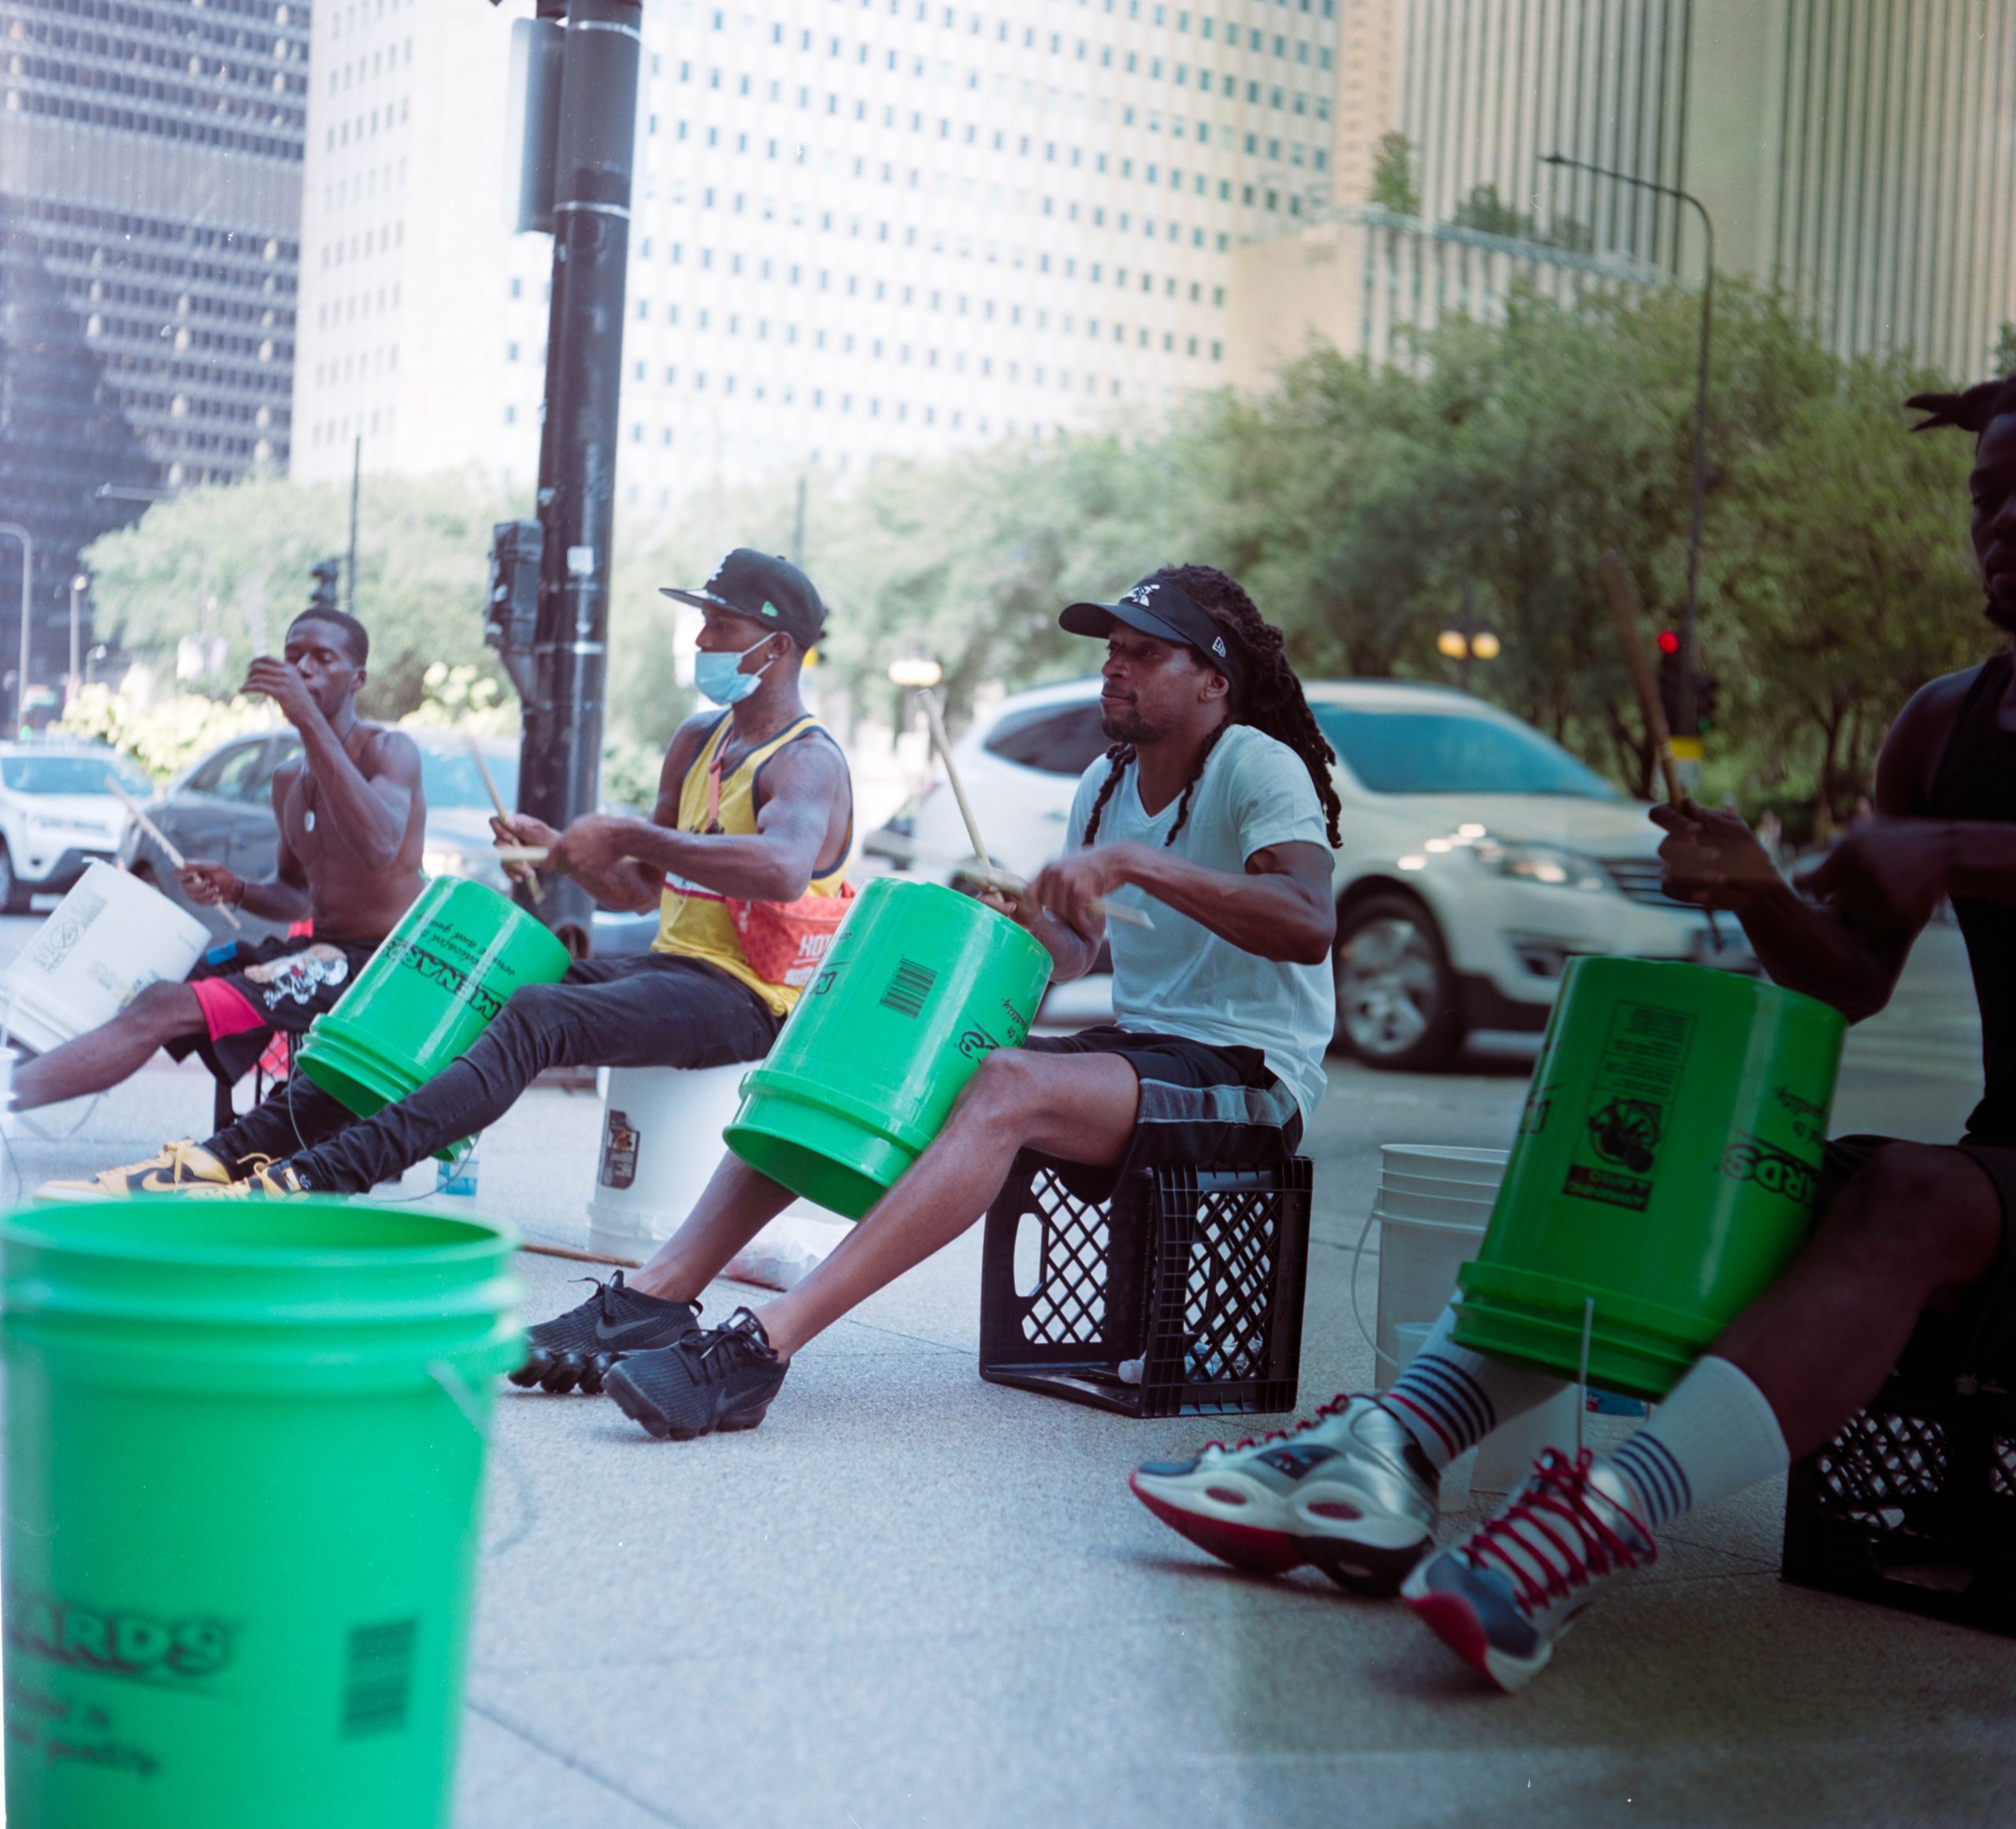 NFT picture of street drummers by Brittany Pierre